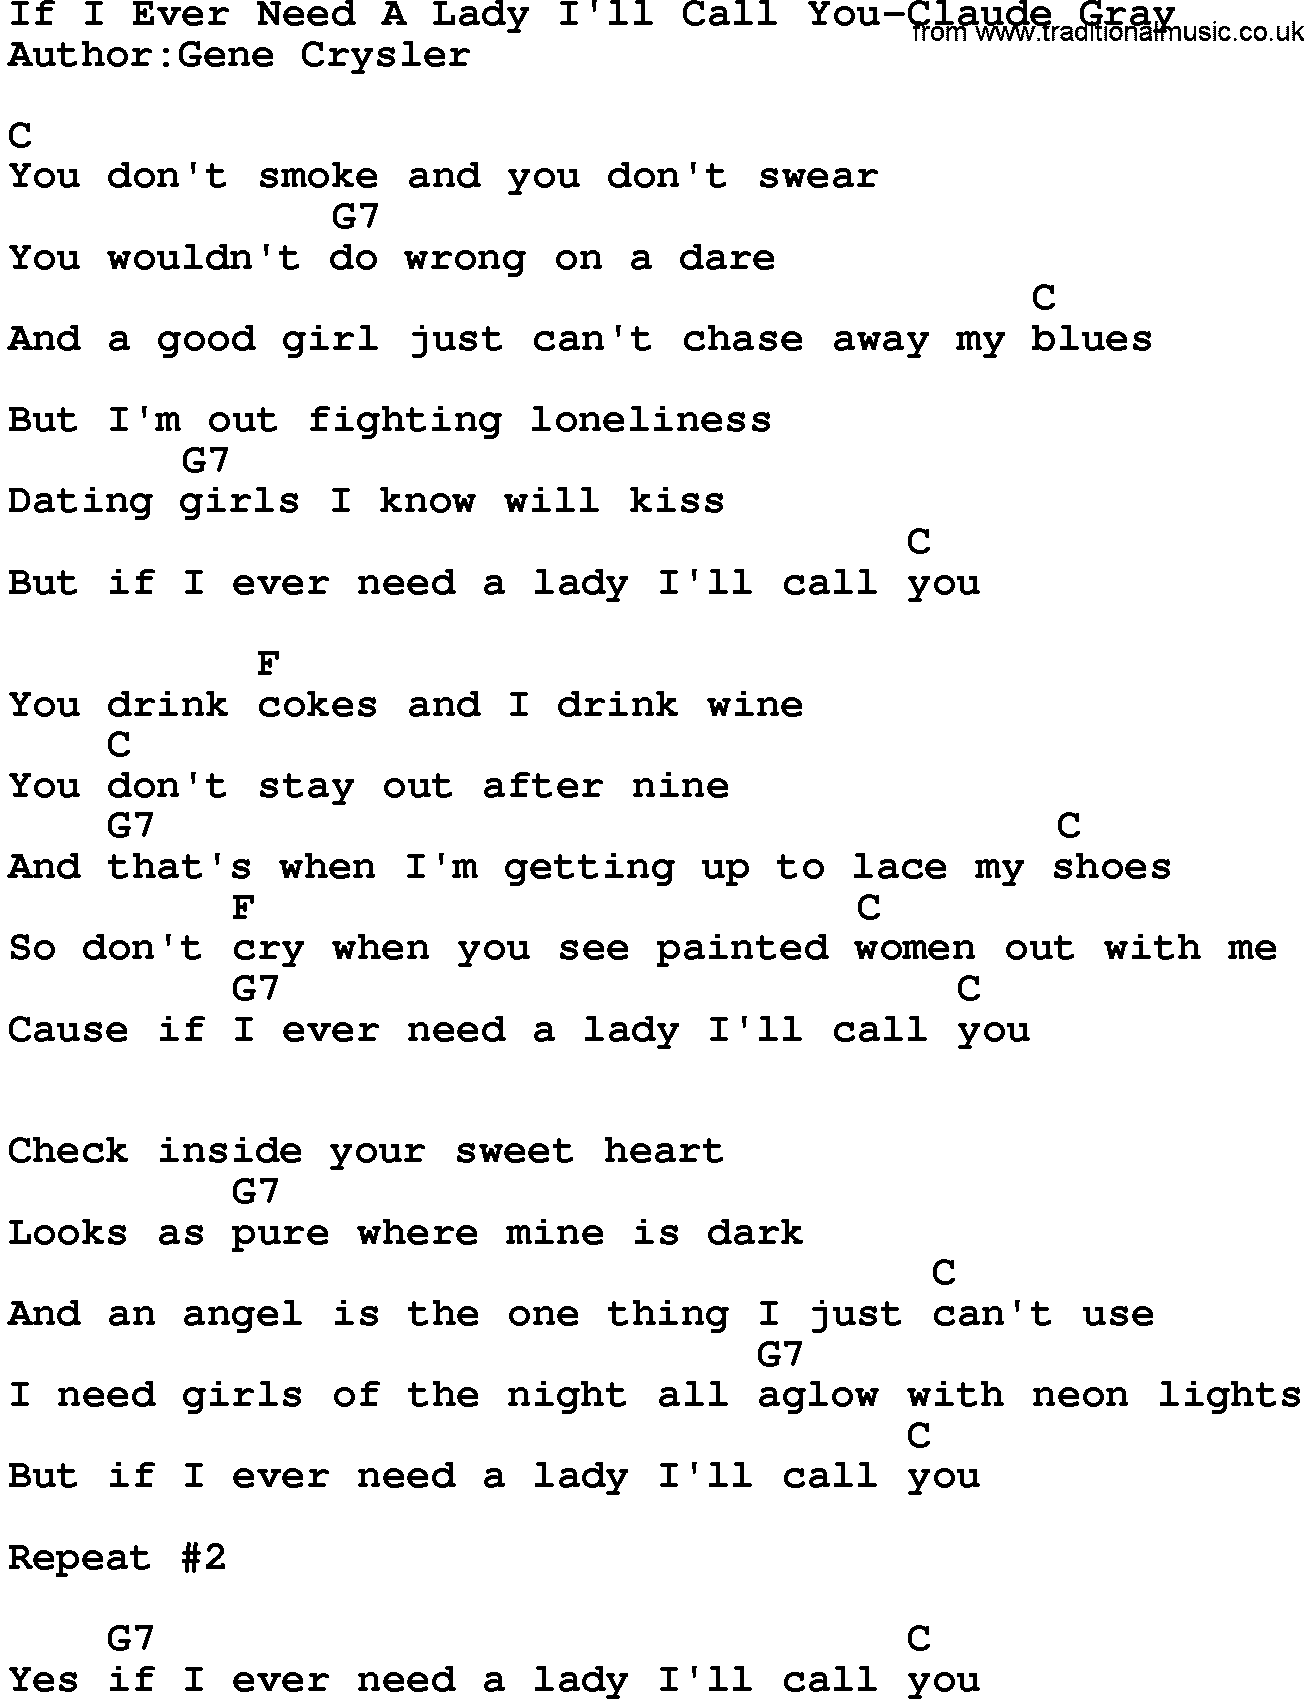 Country music song: If I Ever Need A Lady I'll Call You-Claude Gray lyrics and chords